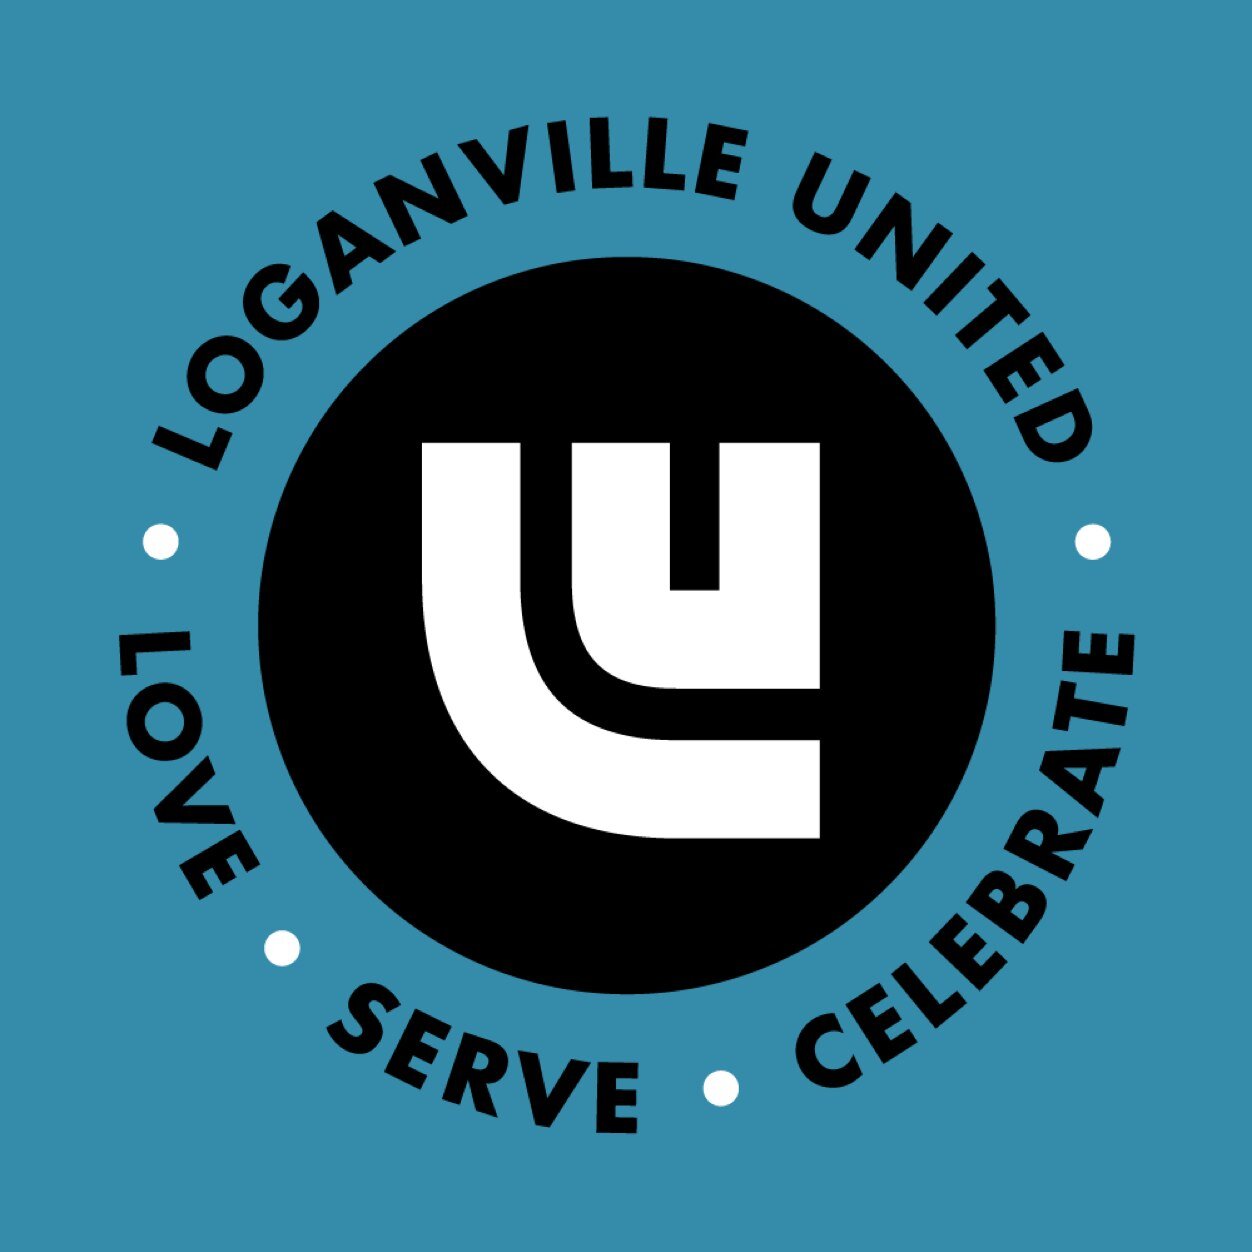 The Christian community coming together to love, serve, and celebrate Jesus, each other, and the city of Loganville